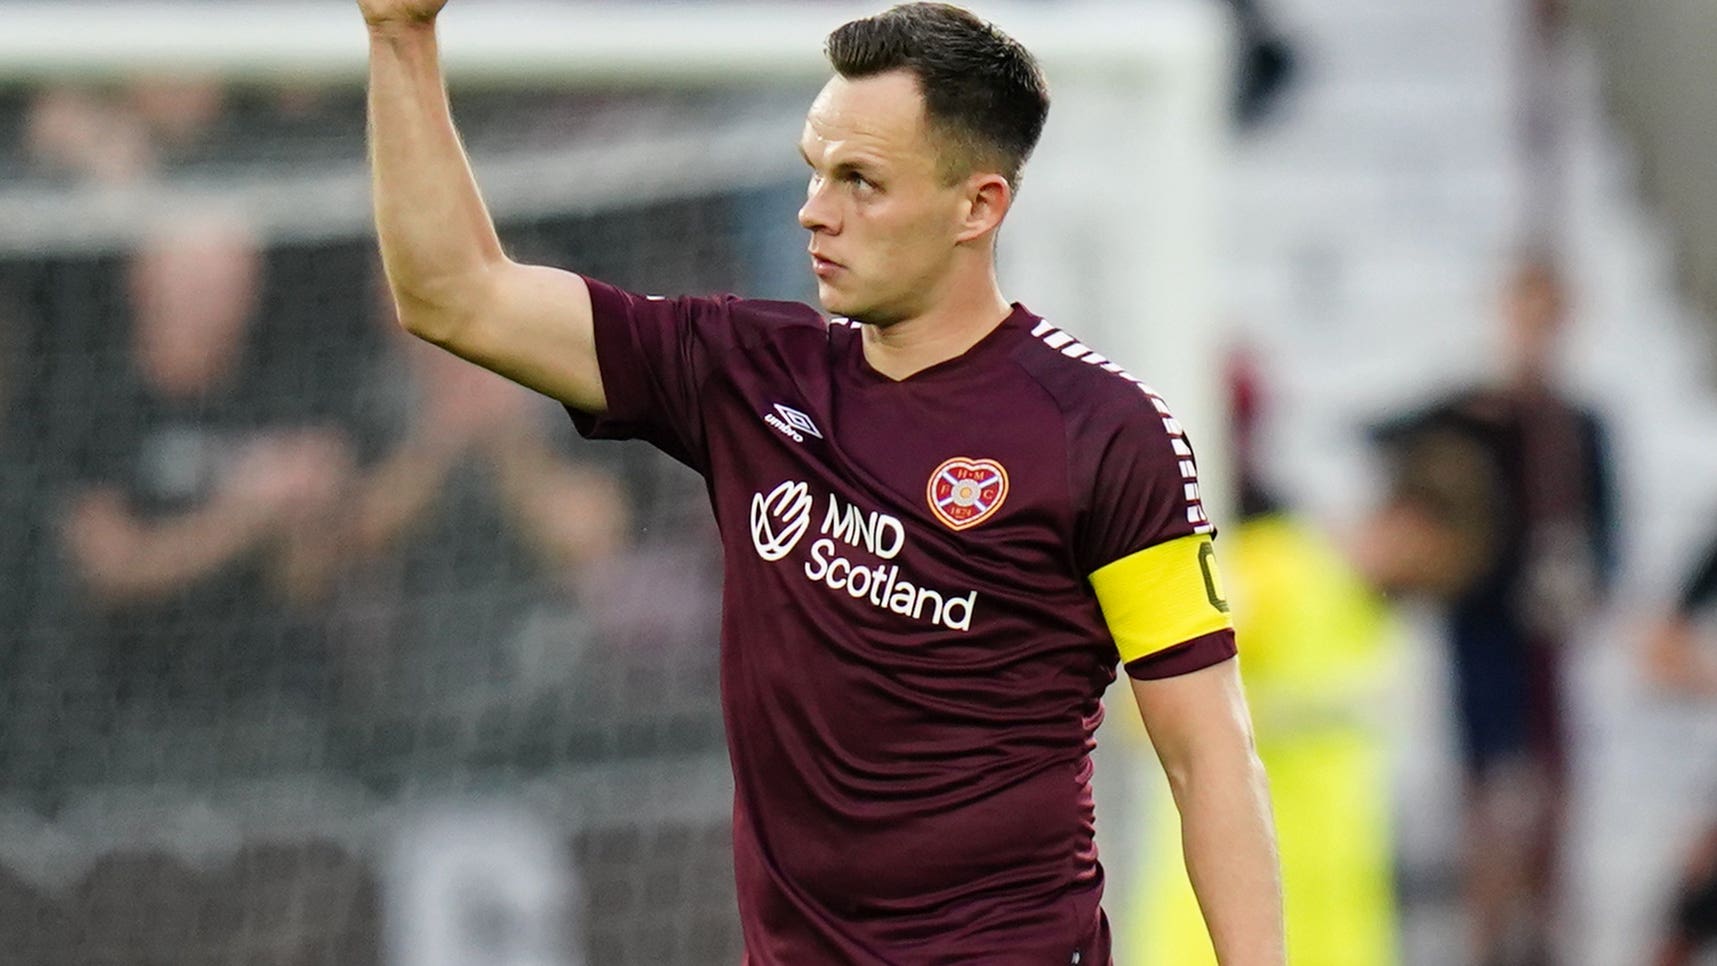 Lawrence Shankland strikes again as Hearts secure victory against St Johnstone